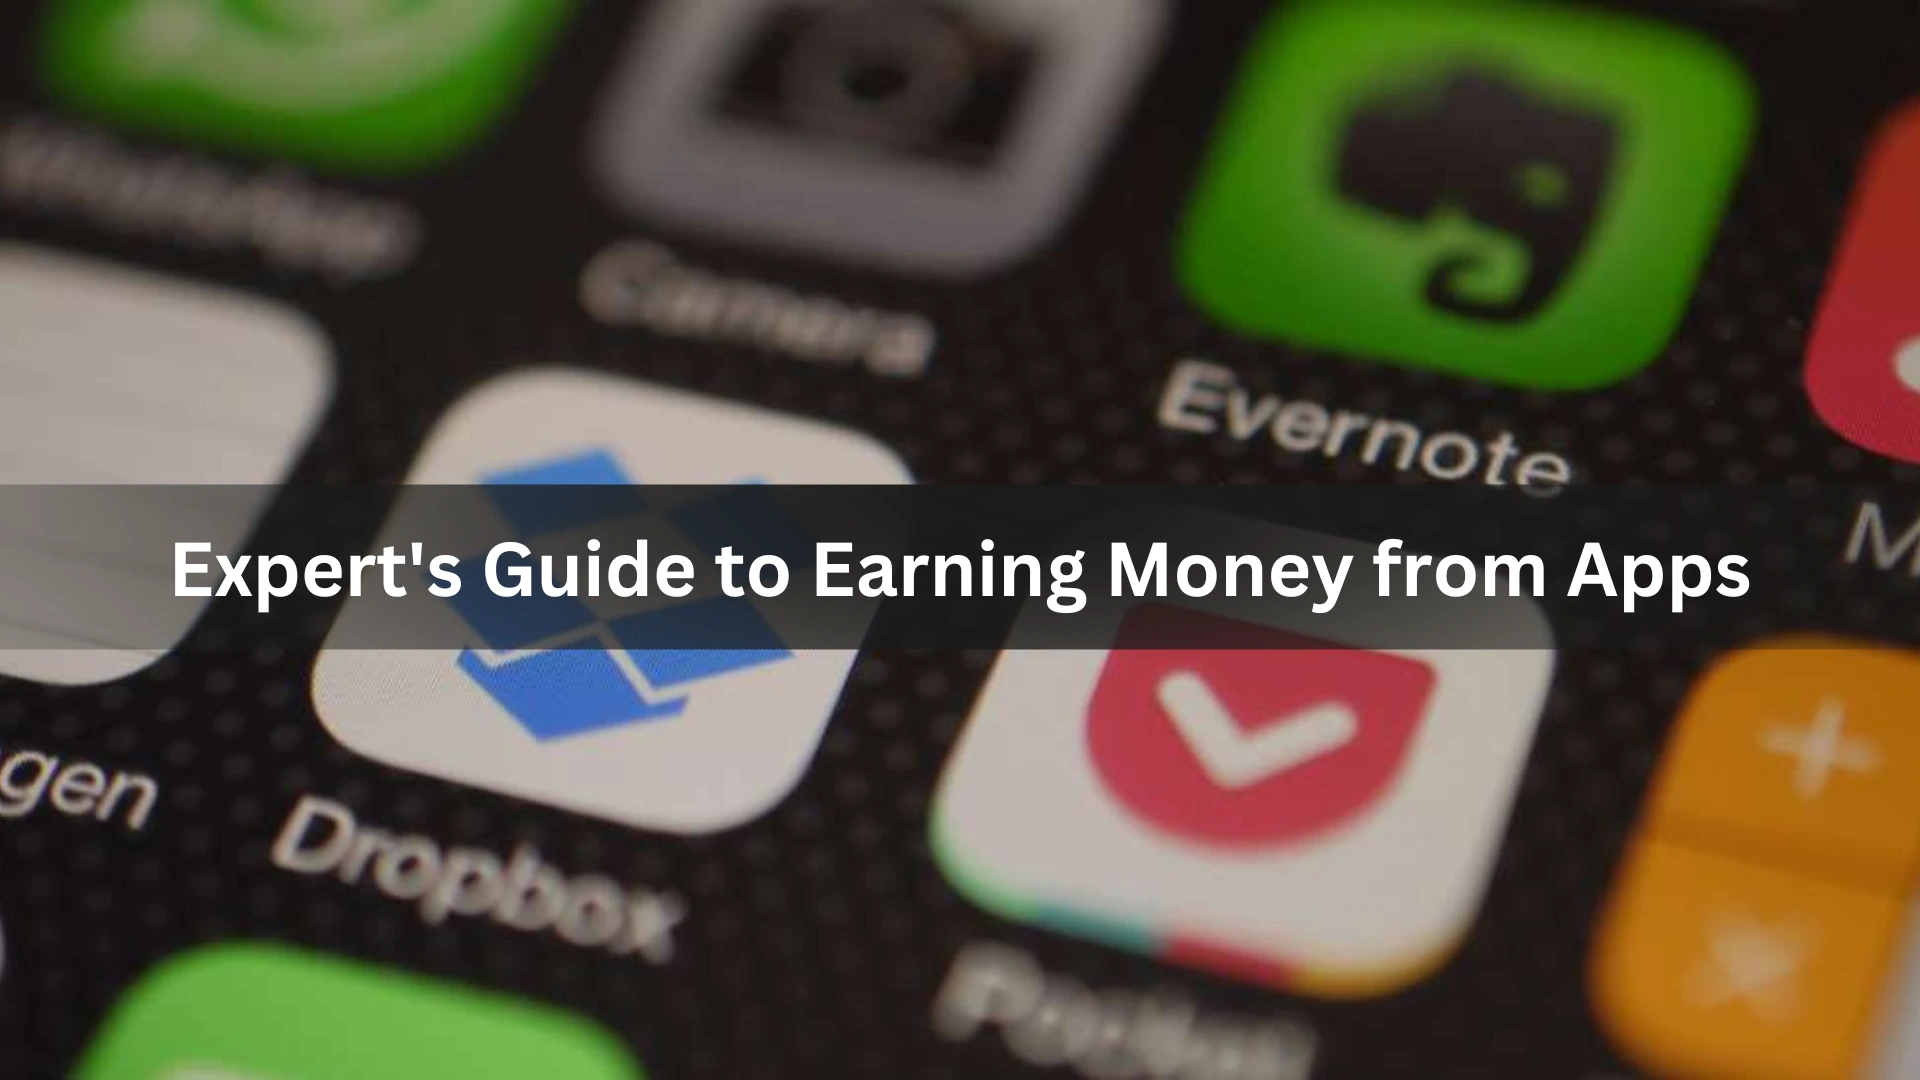 Expert's Guide to Earning Money from Apps